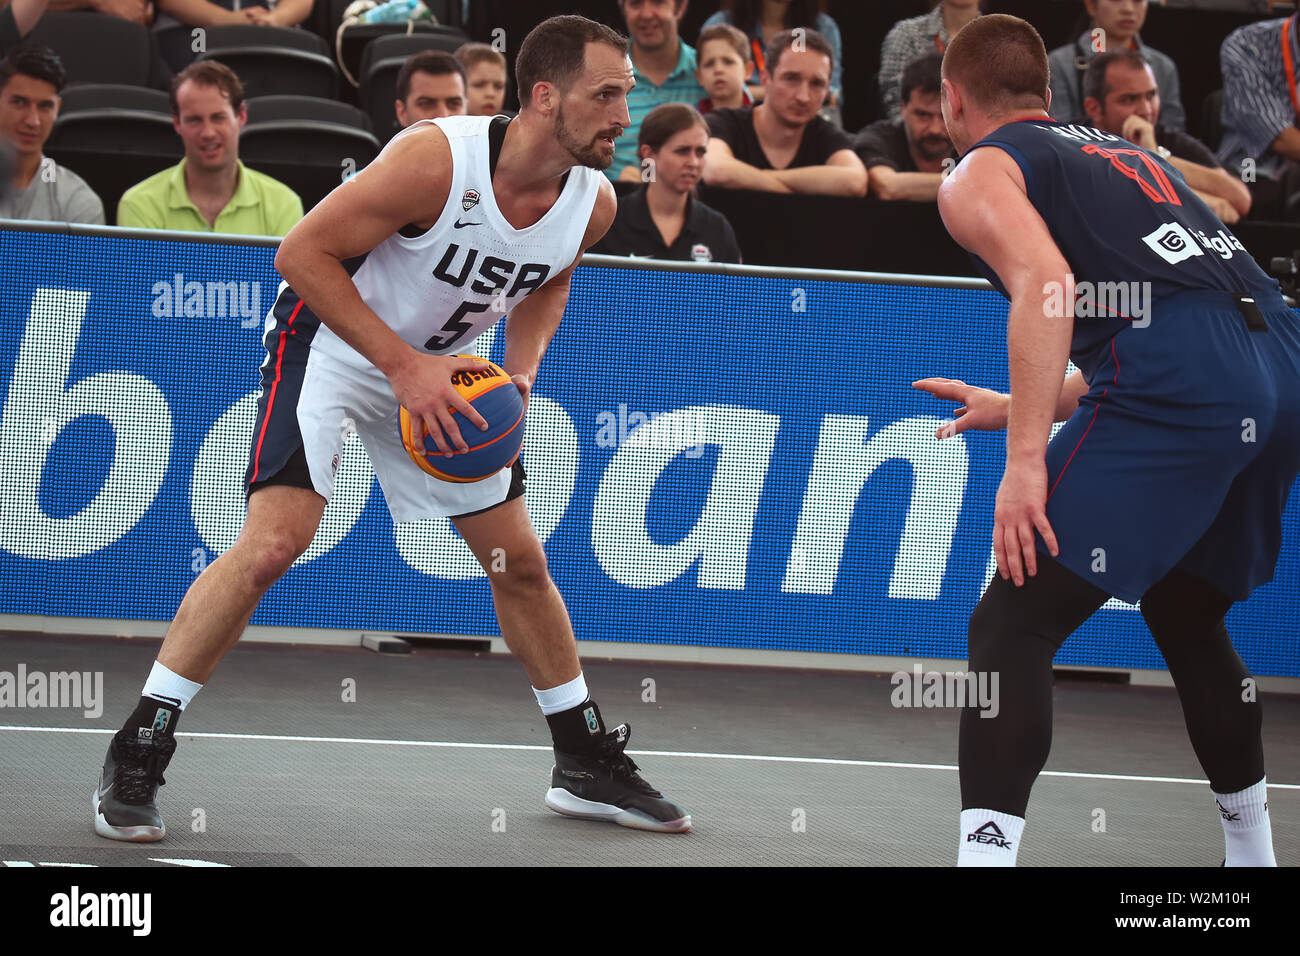 Amsterdam, Netherlands, June 19, 2019: Damon Huffman in action during the basketball game Serbia vs United States during the basketball 3x3 world cup Stock Photo